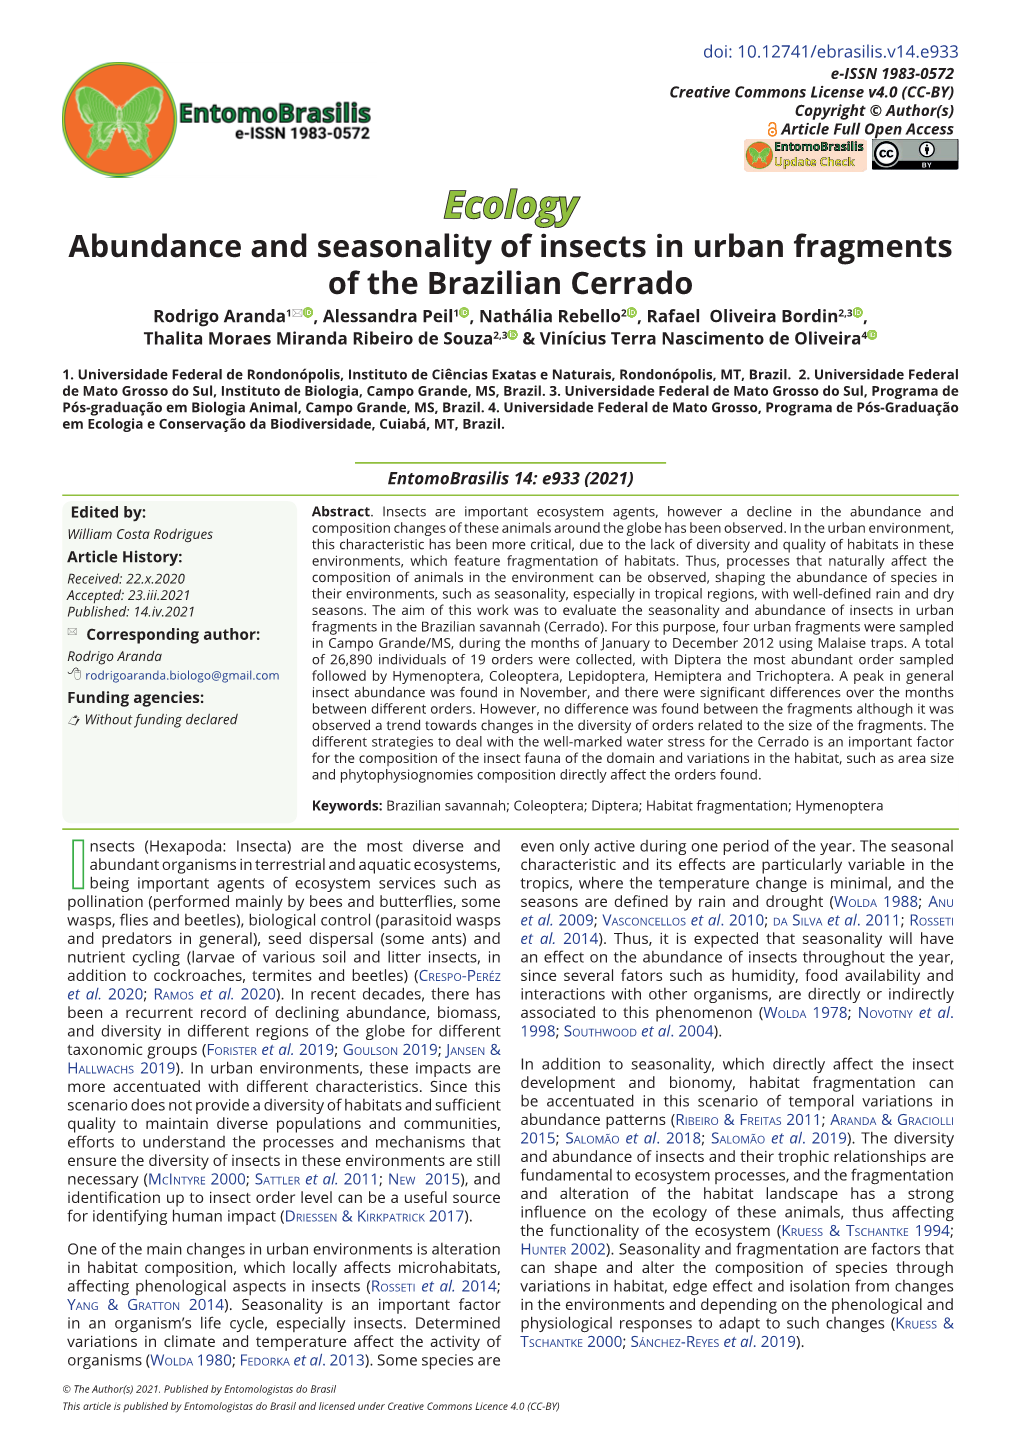 Abundance and Seasonality of Insects in Urban Fragments of the Brazilian